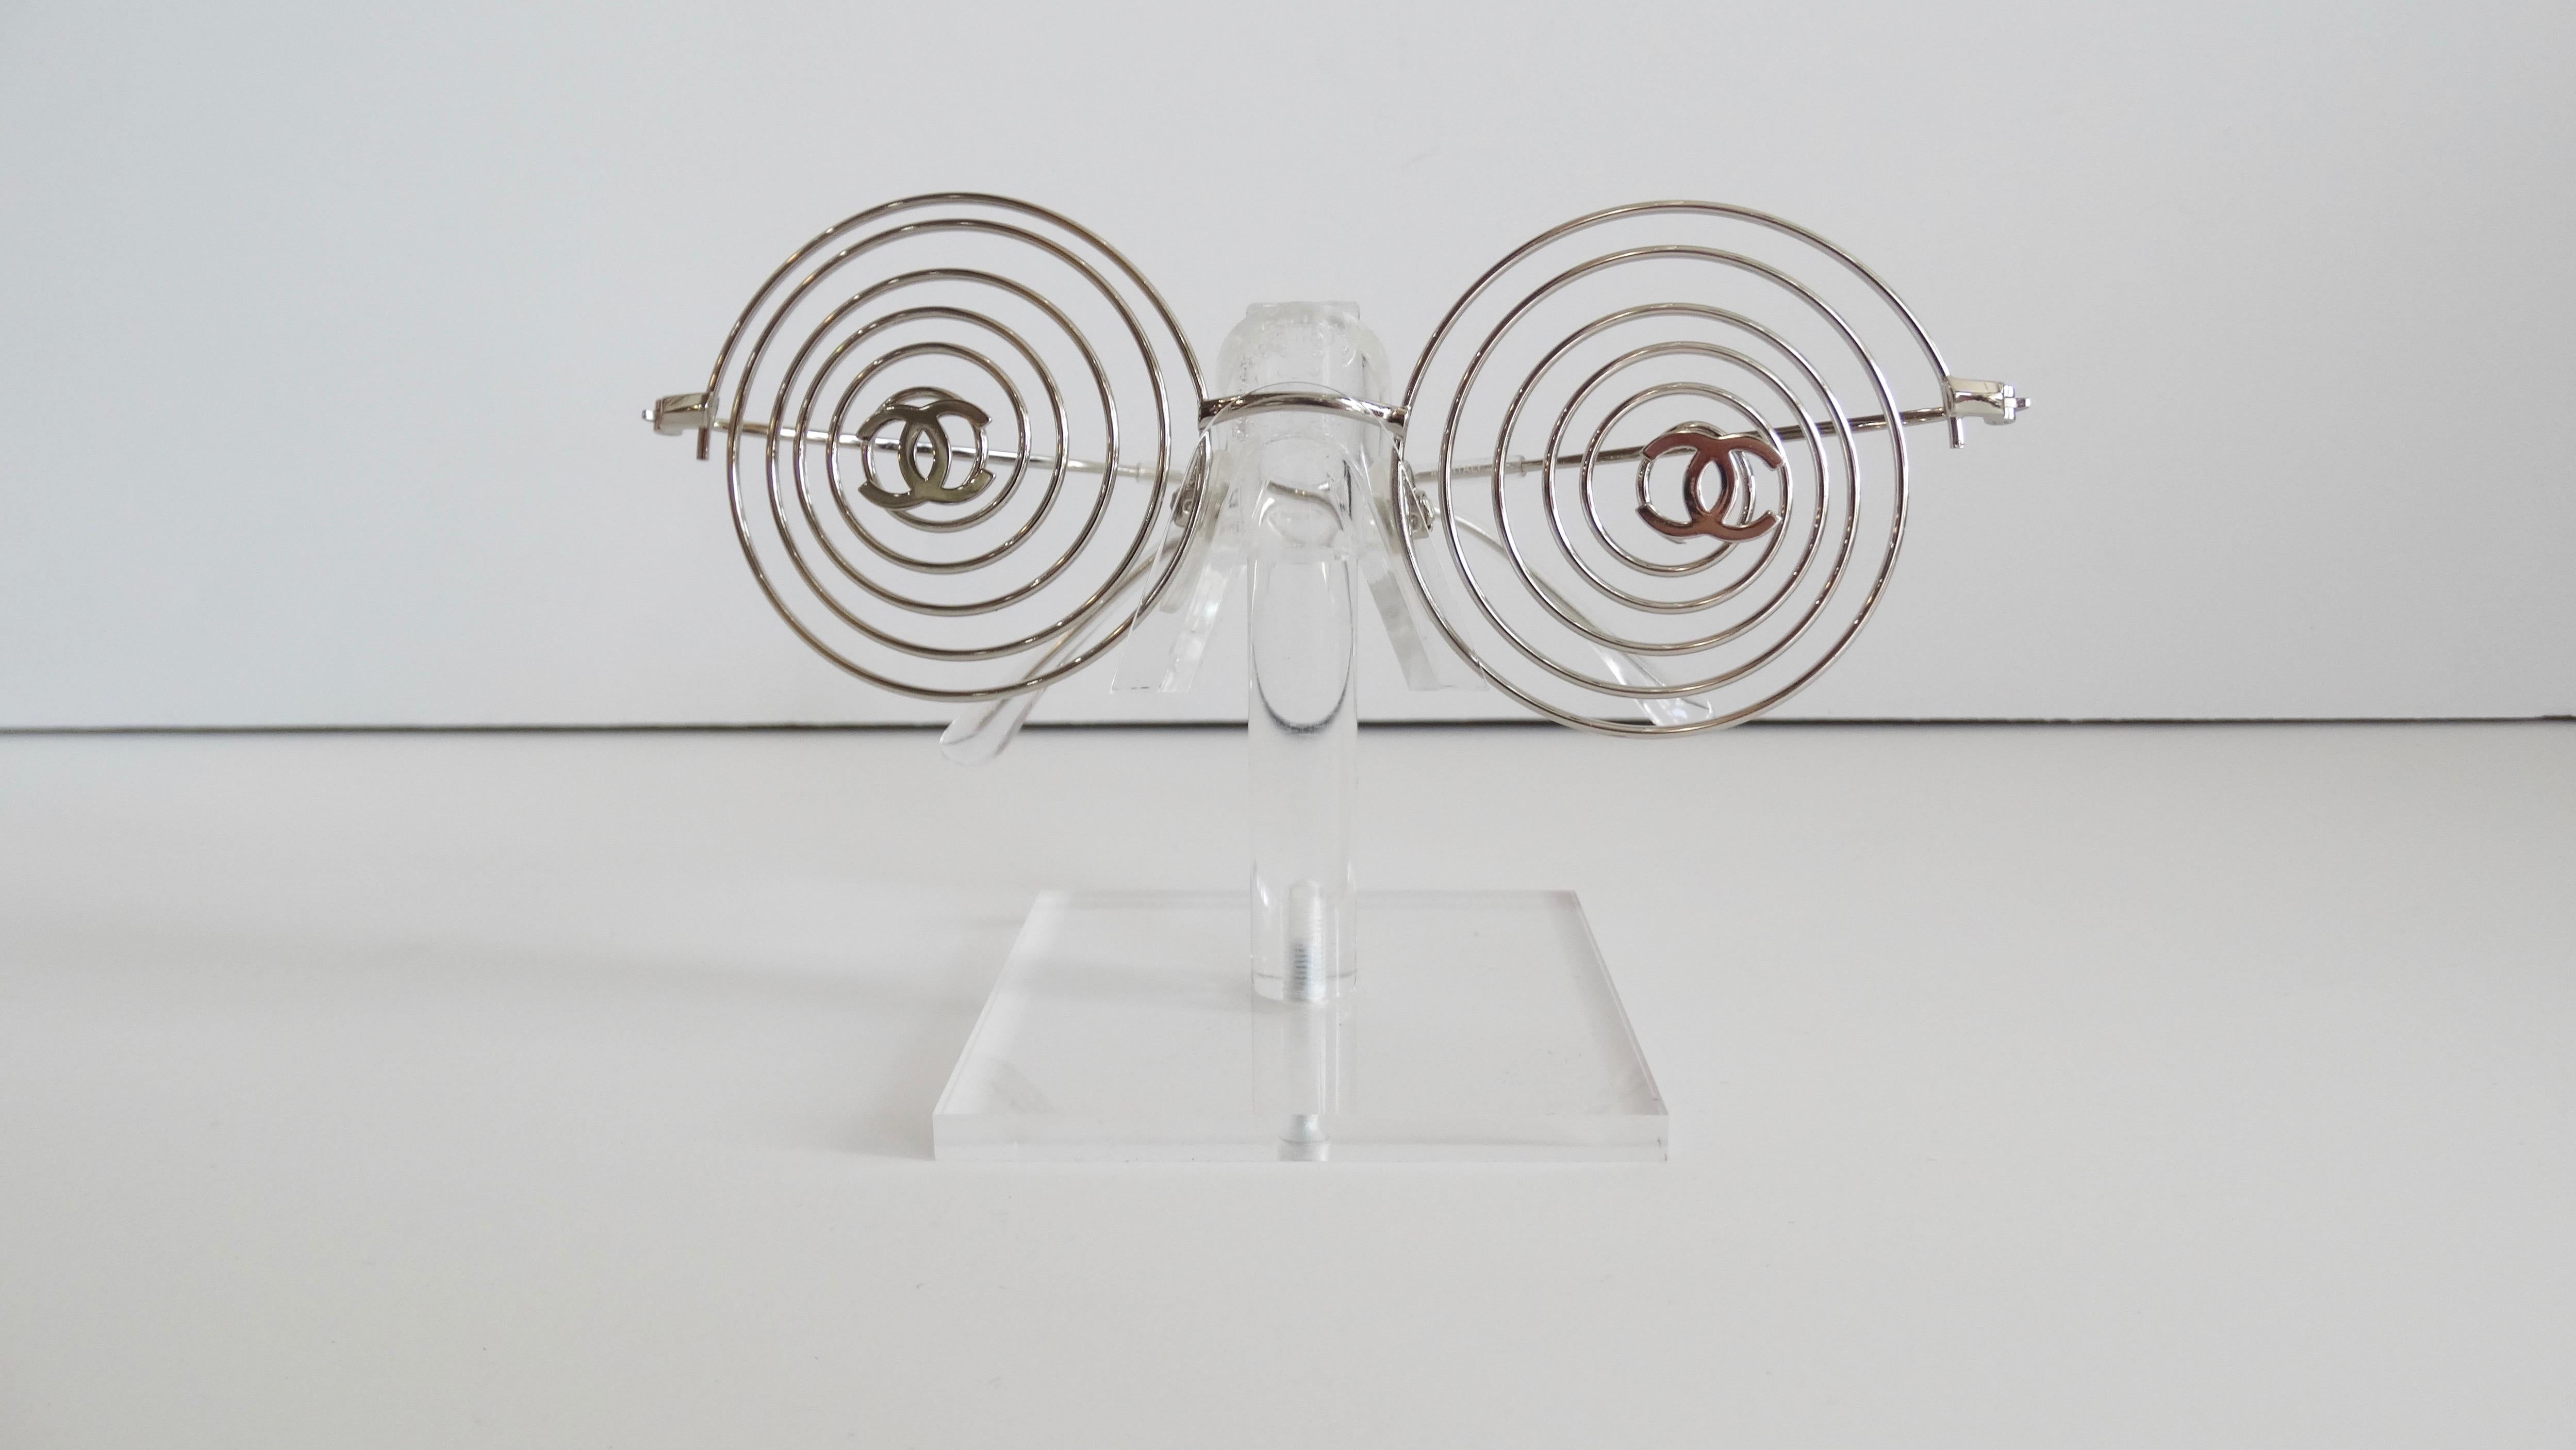 Score yourself a piece of fashion history with our Karl Lagerfeld era Chanel glasses circa 1996! From the same iconic collection that gave us the tiniest Chanel bikini ever, comes this incredible pair of silver spiral fashion frames. Metallic frames